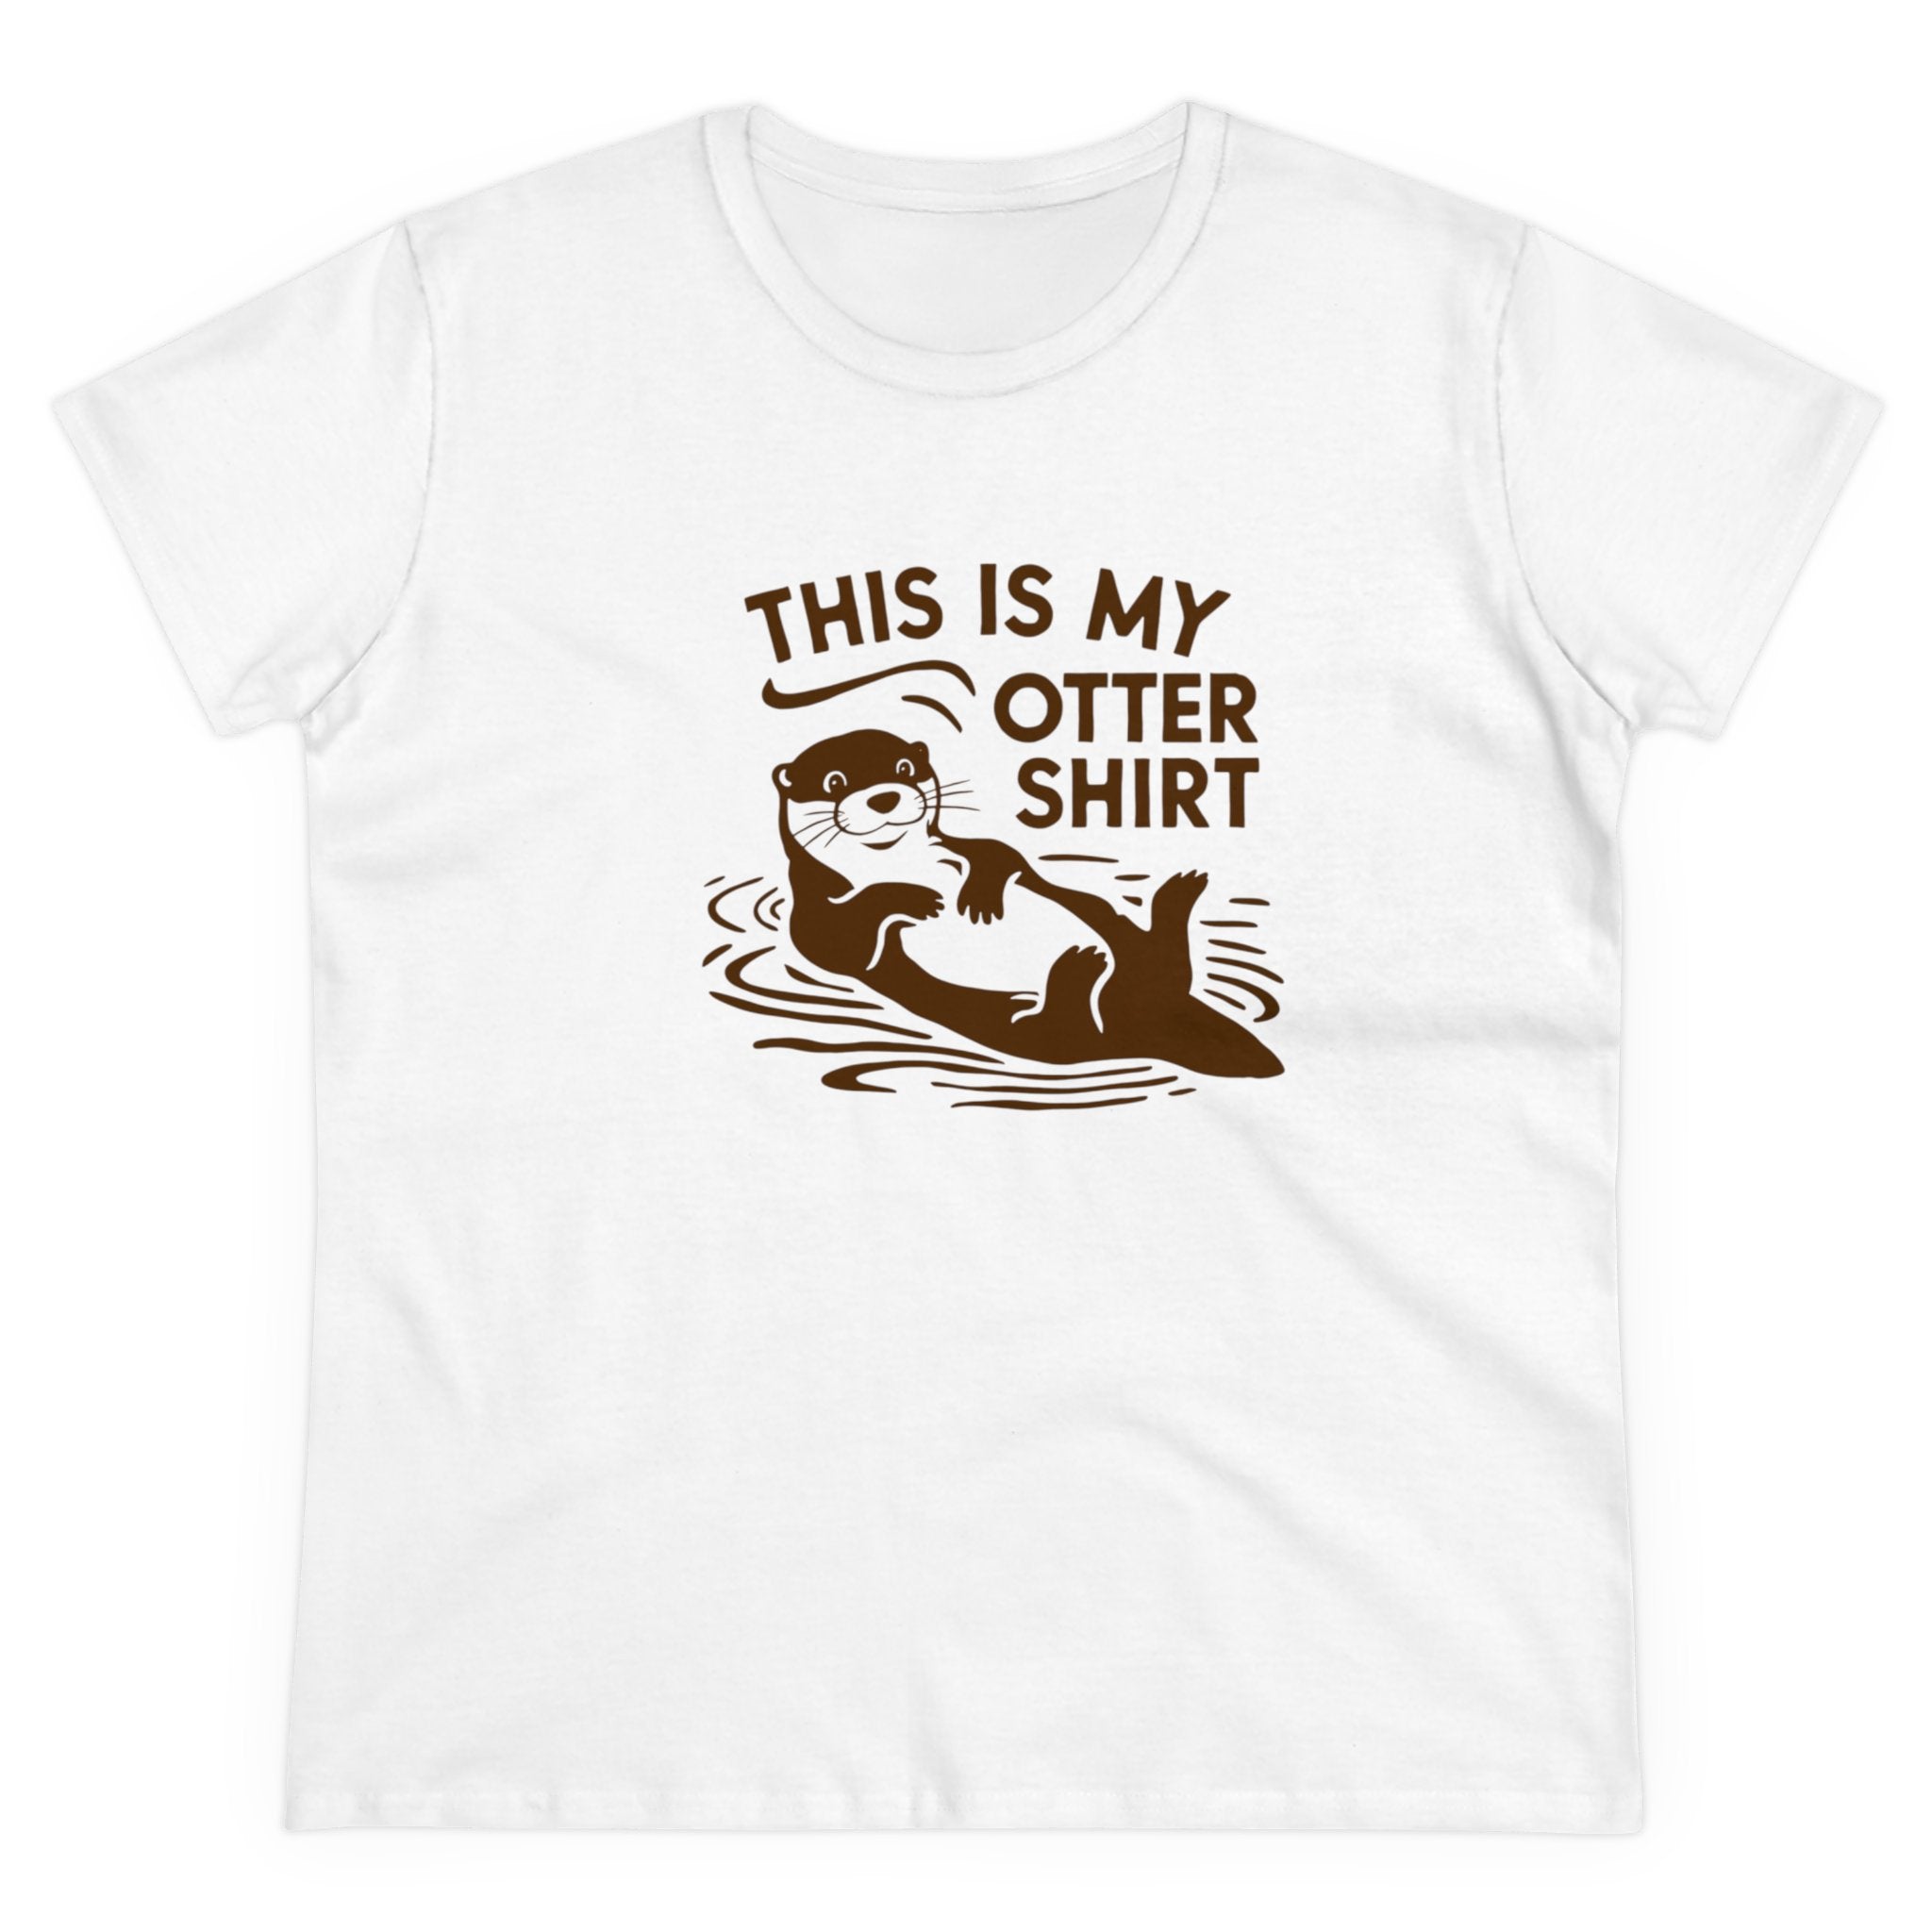 A soft cotton, white My Otter Shirt - Women's Tee featuring an illustration of an otter with the text "This is my otter shirt" in brown. Semi-fitted for a flattering look.